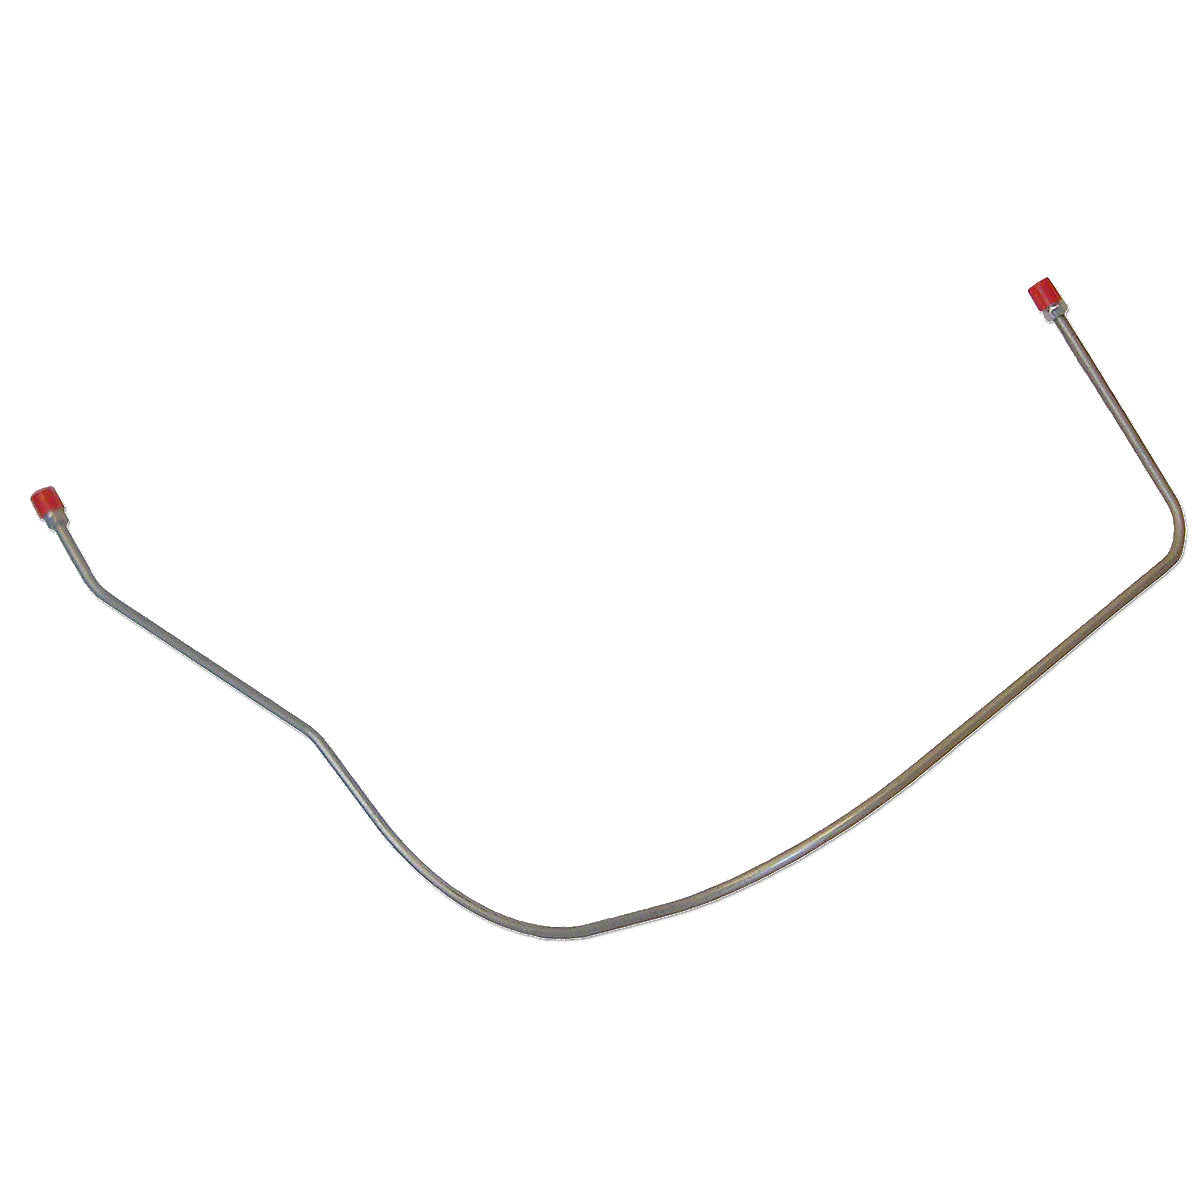 NCA9282C Fuel Line Assembly -Fits Ford Tractor